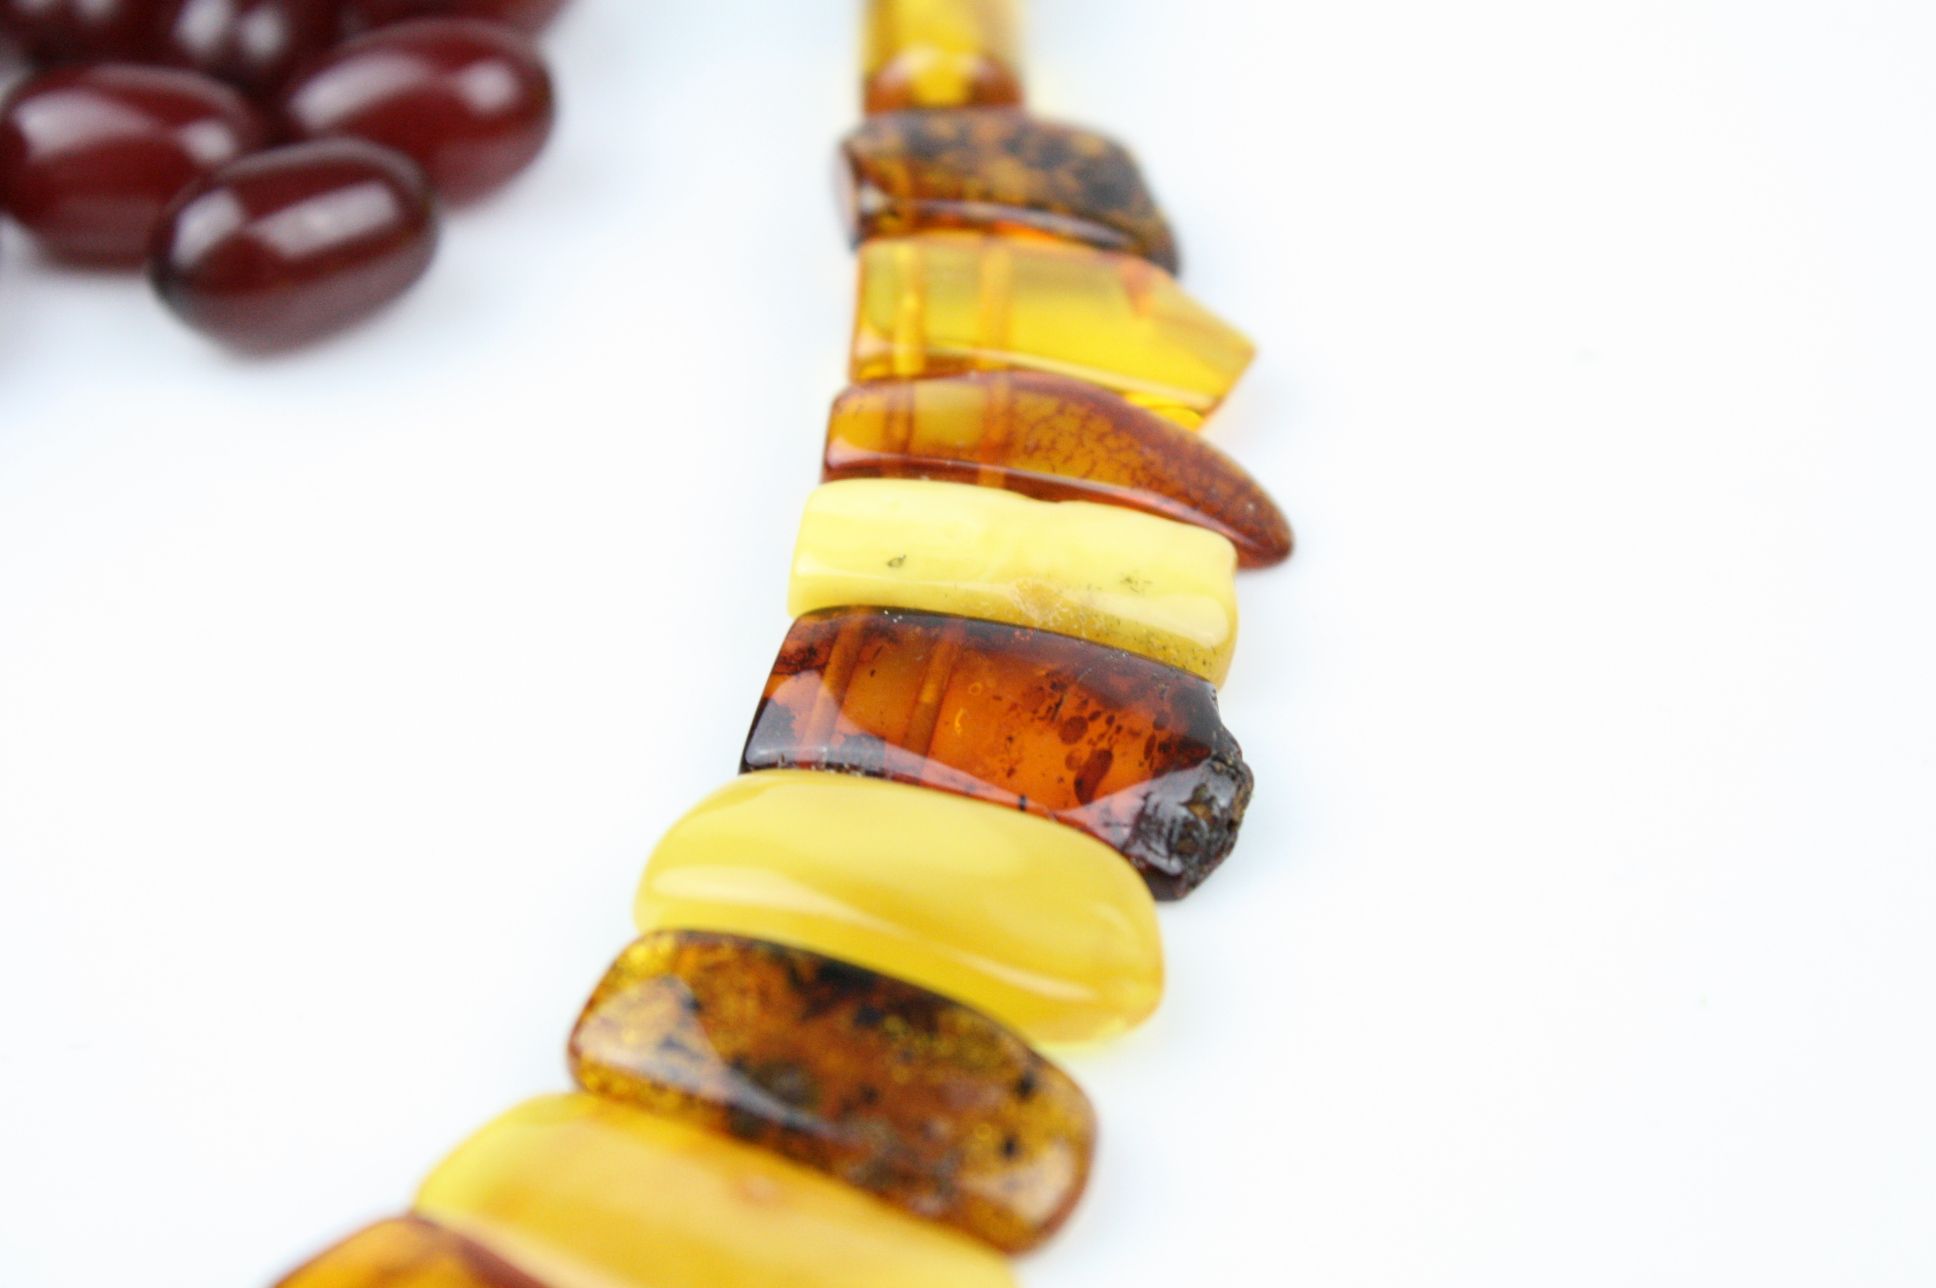 Amber and clarified amber fringe necklace, comprising various shades of amber, bakelite screw clasp; - Image 5 of 11